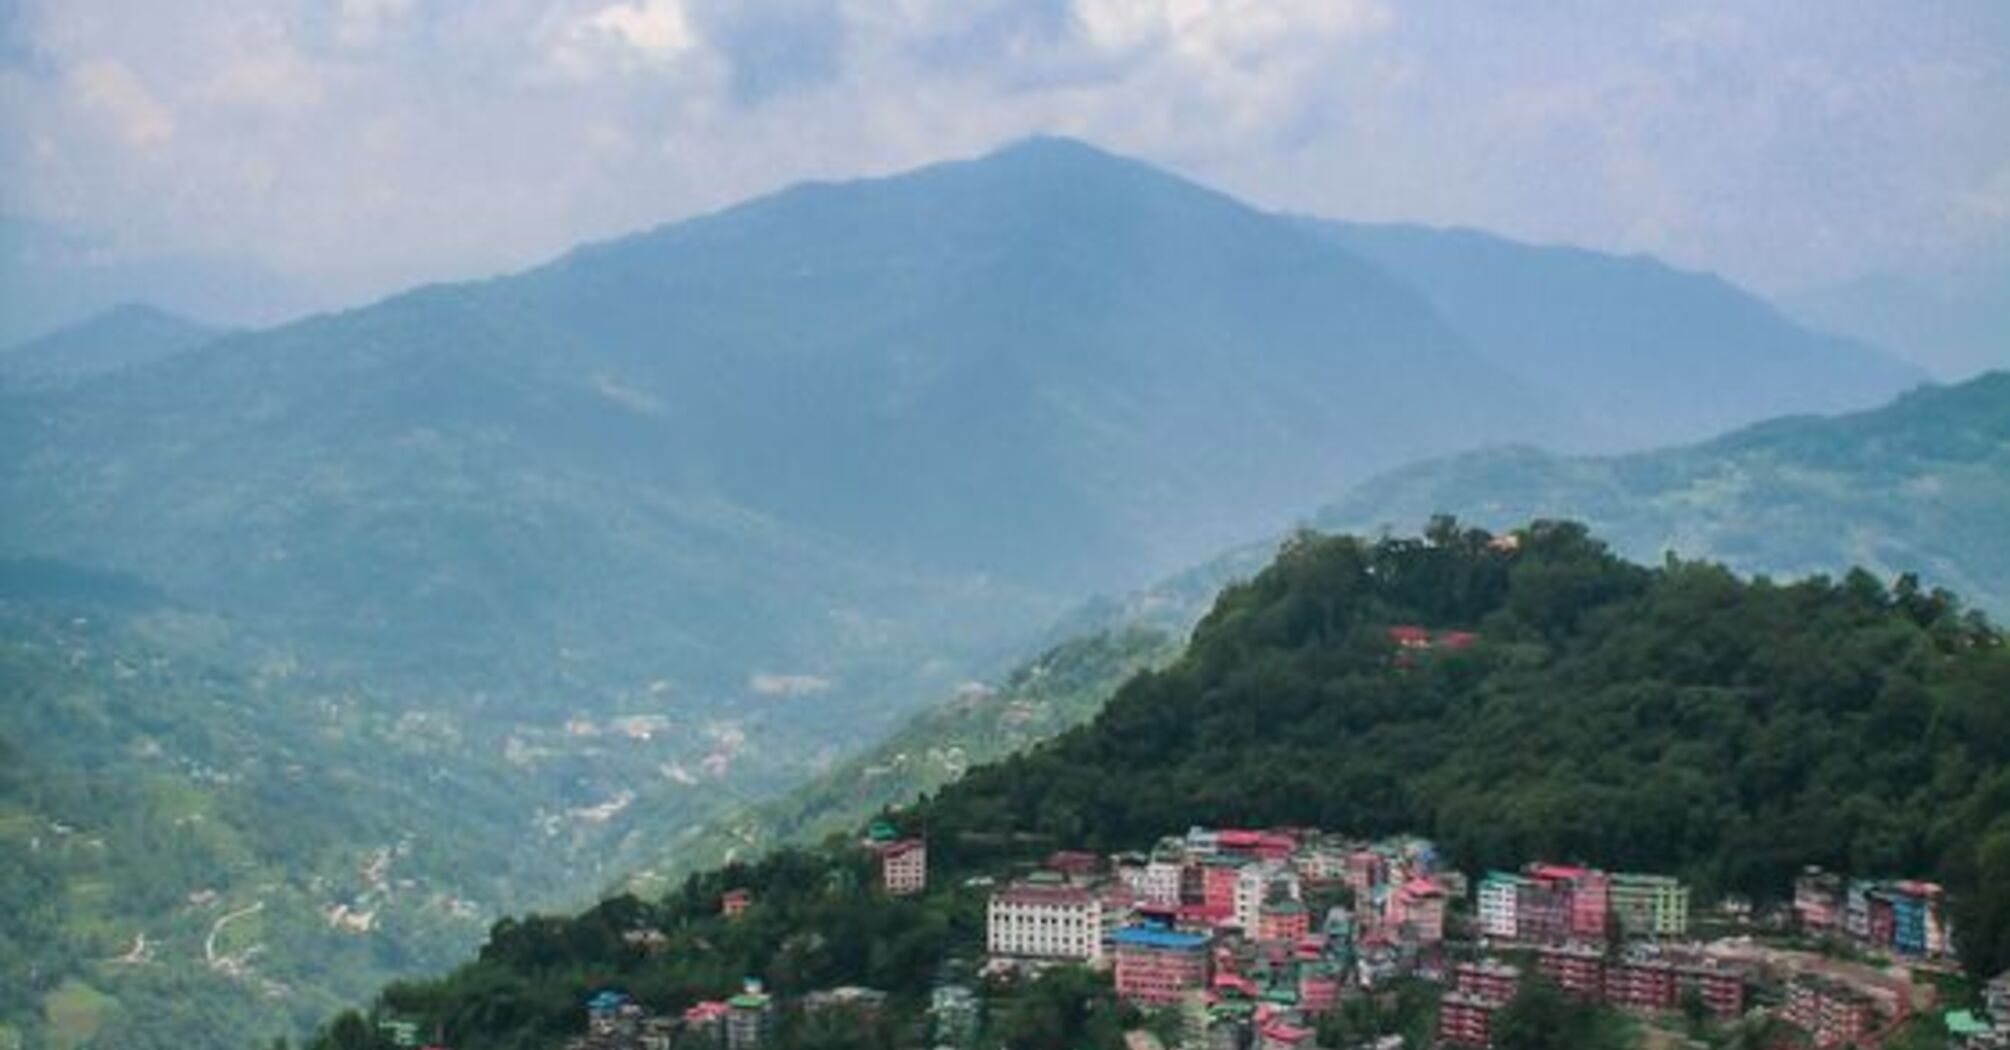 Pelling: why it attracts tourists so much